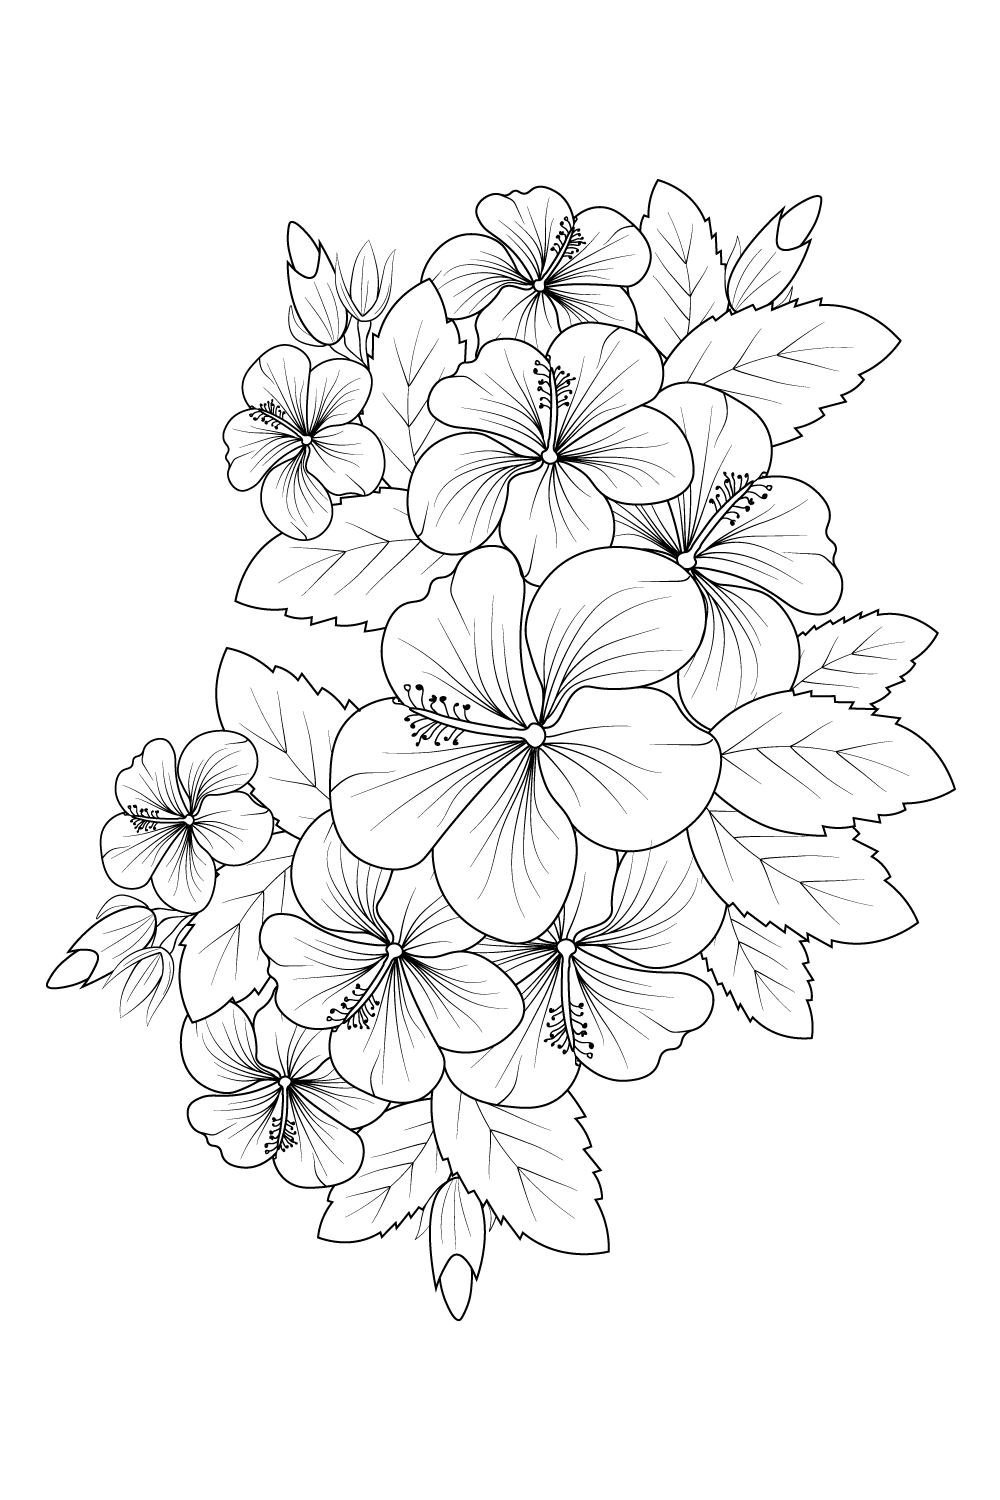 Hibiscus flower drawing Hibiscus flower tattoo Hibiscus flower outline pinterest preview image.